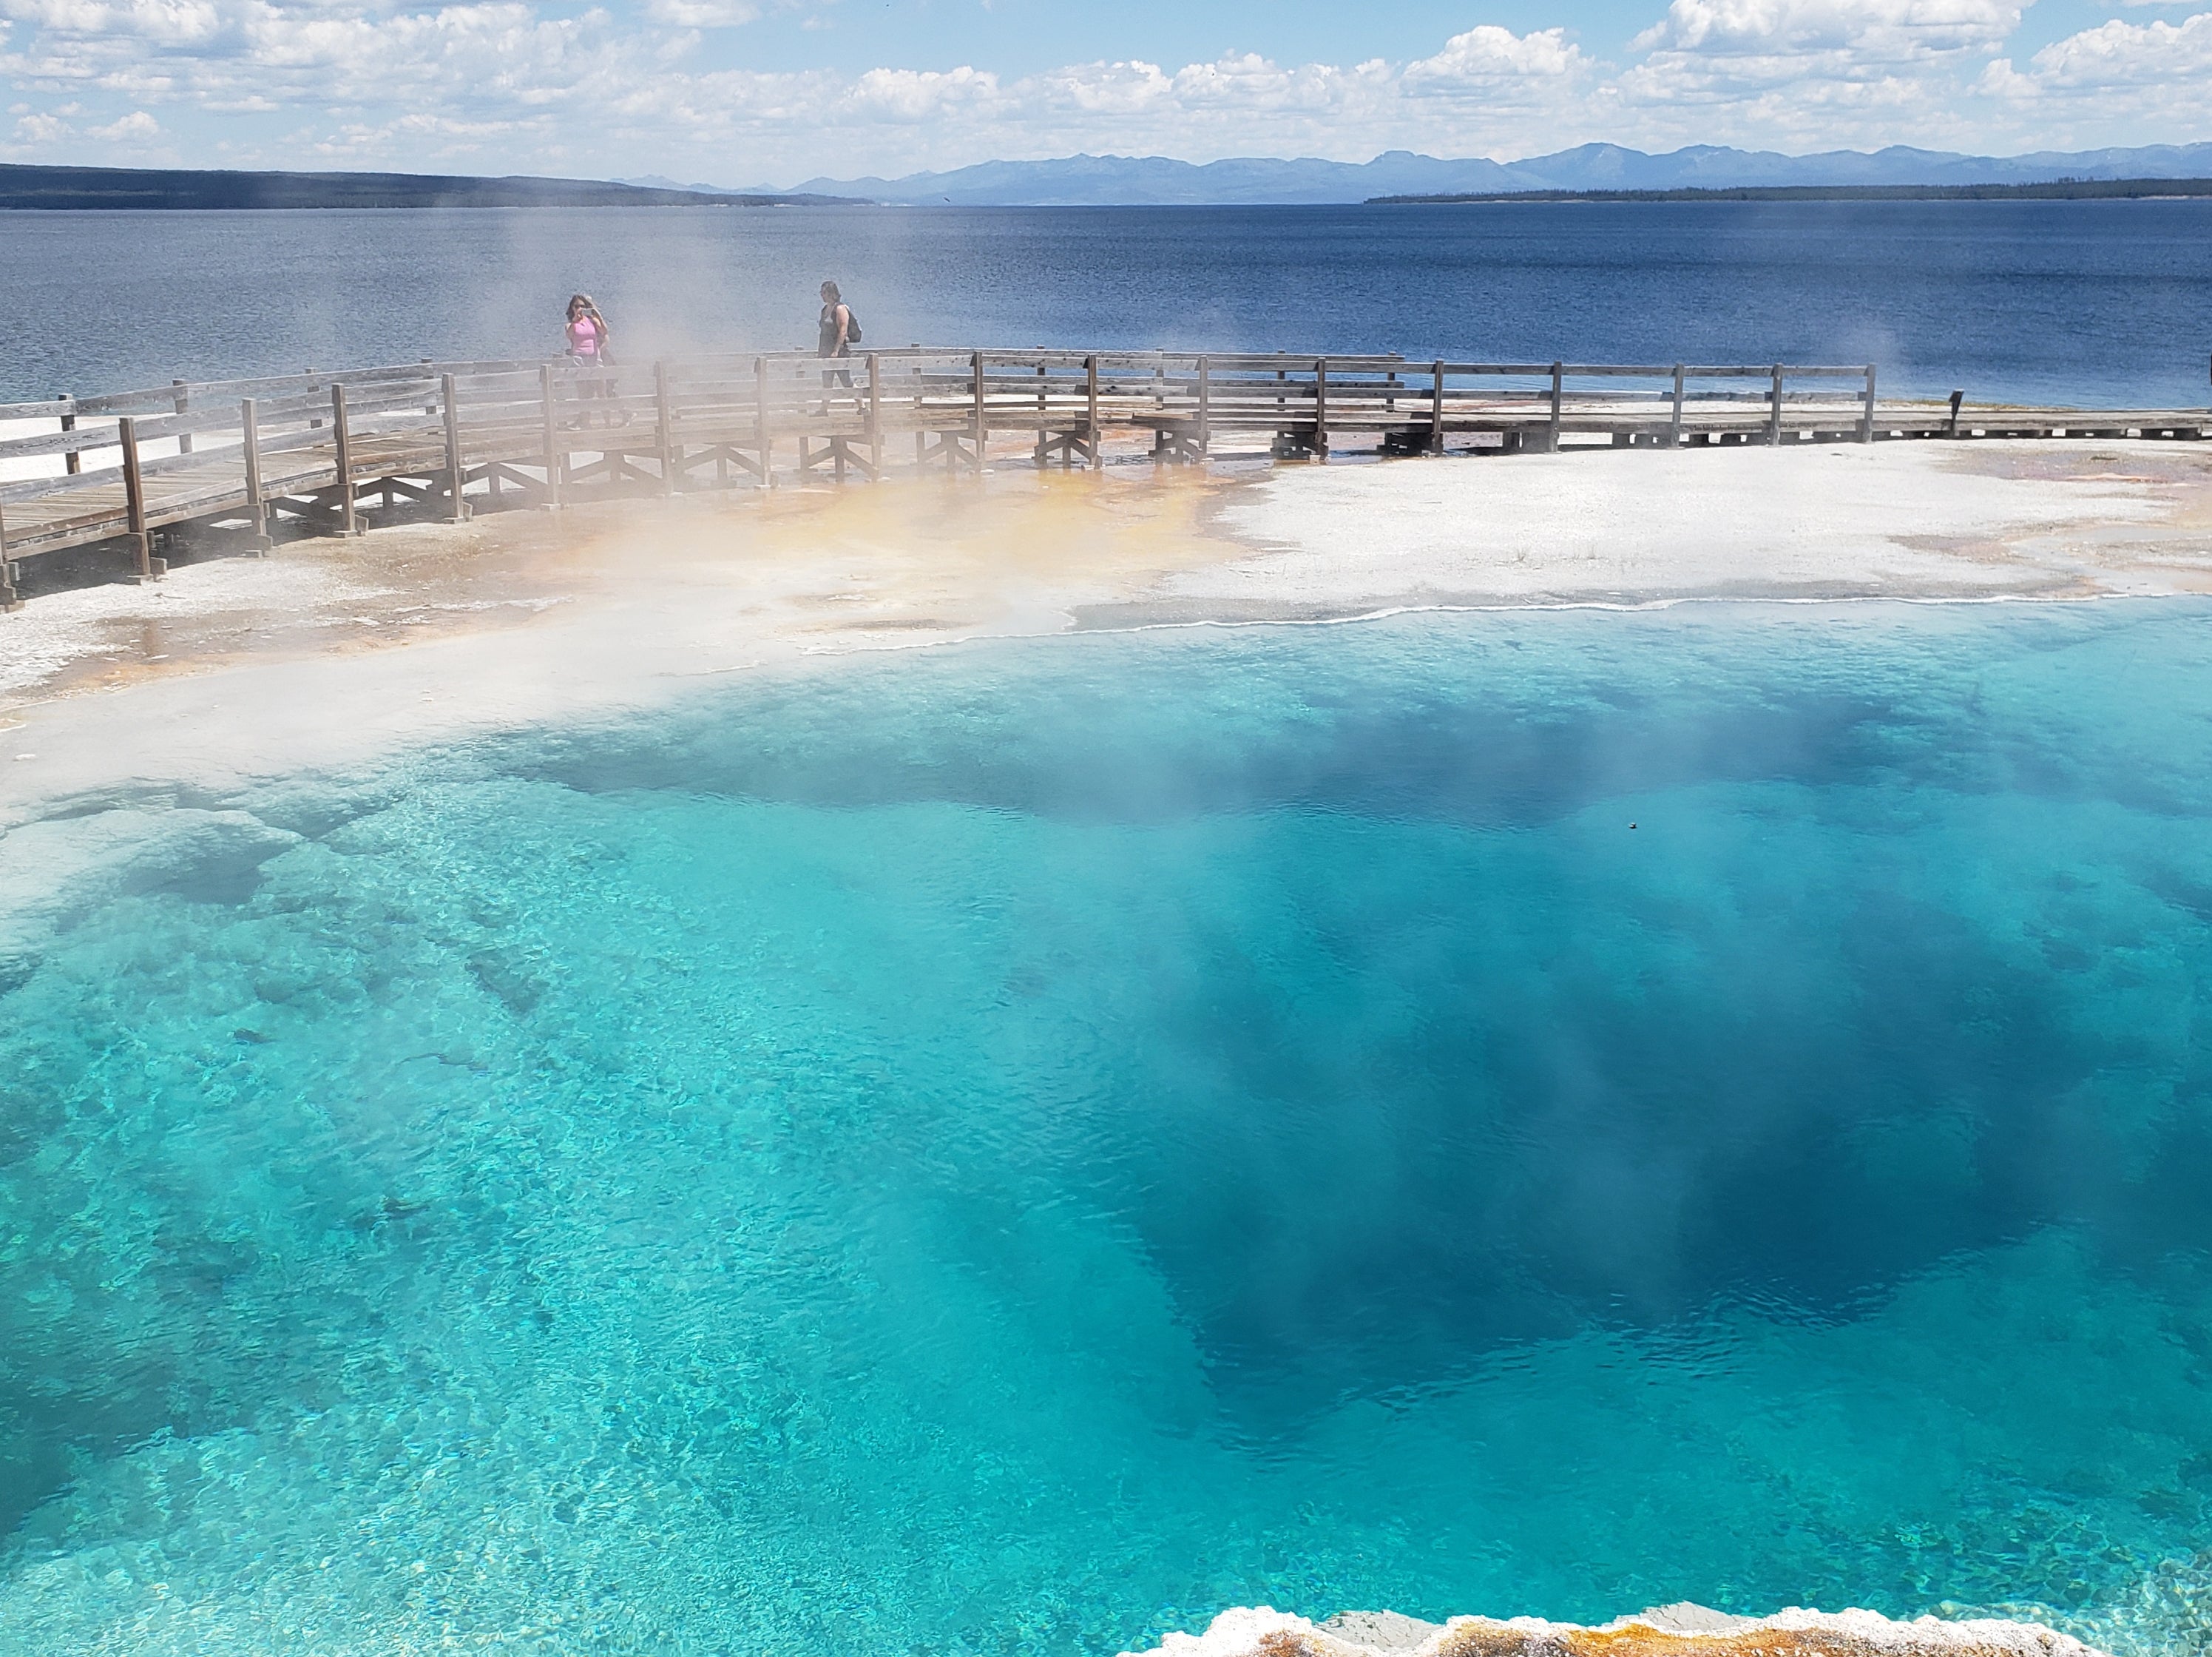 Part of the geothermal features at Yellowstone’s West Thumb Geyser Basin